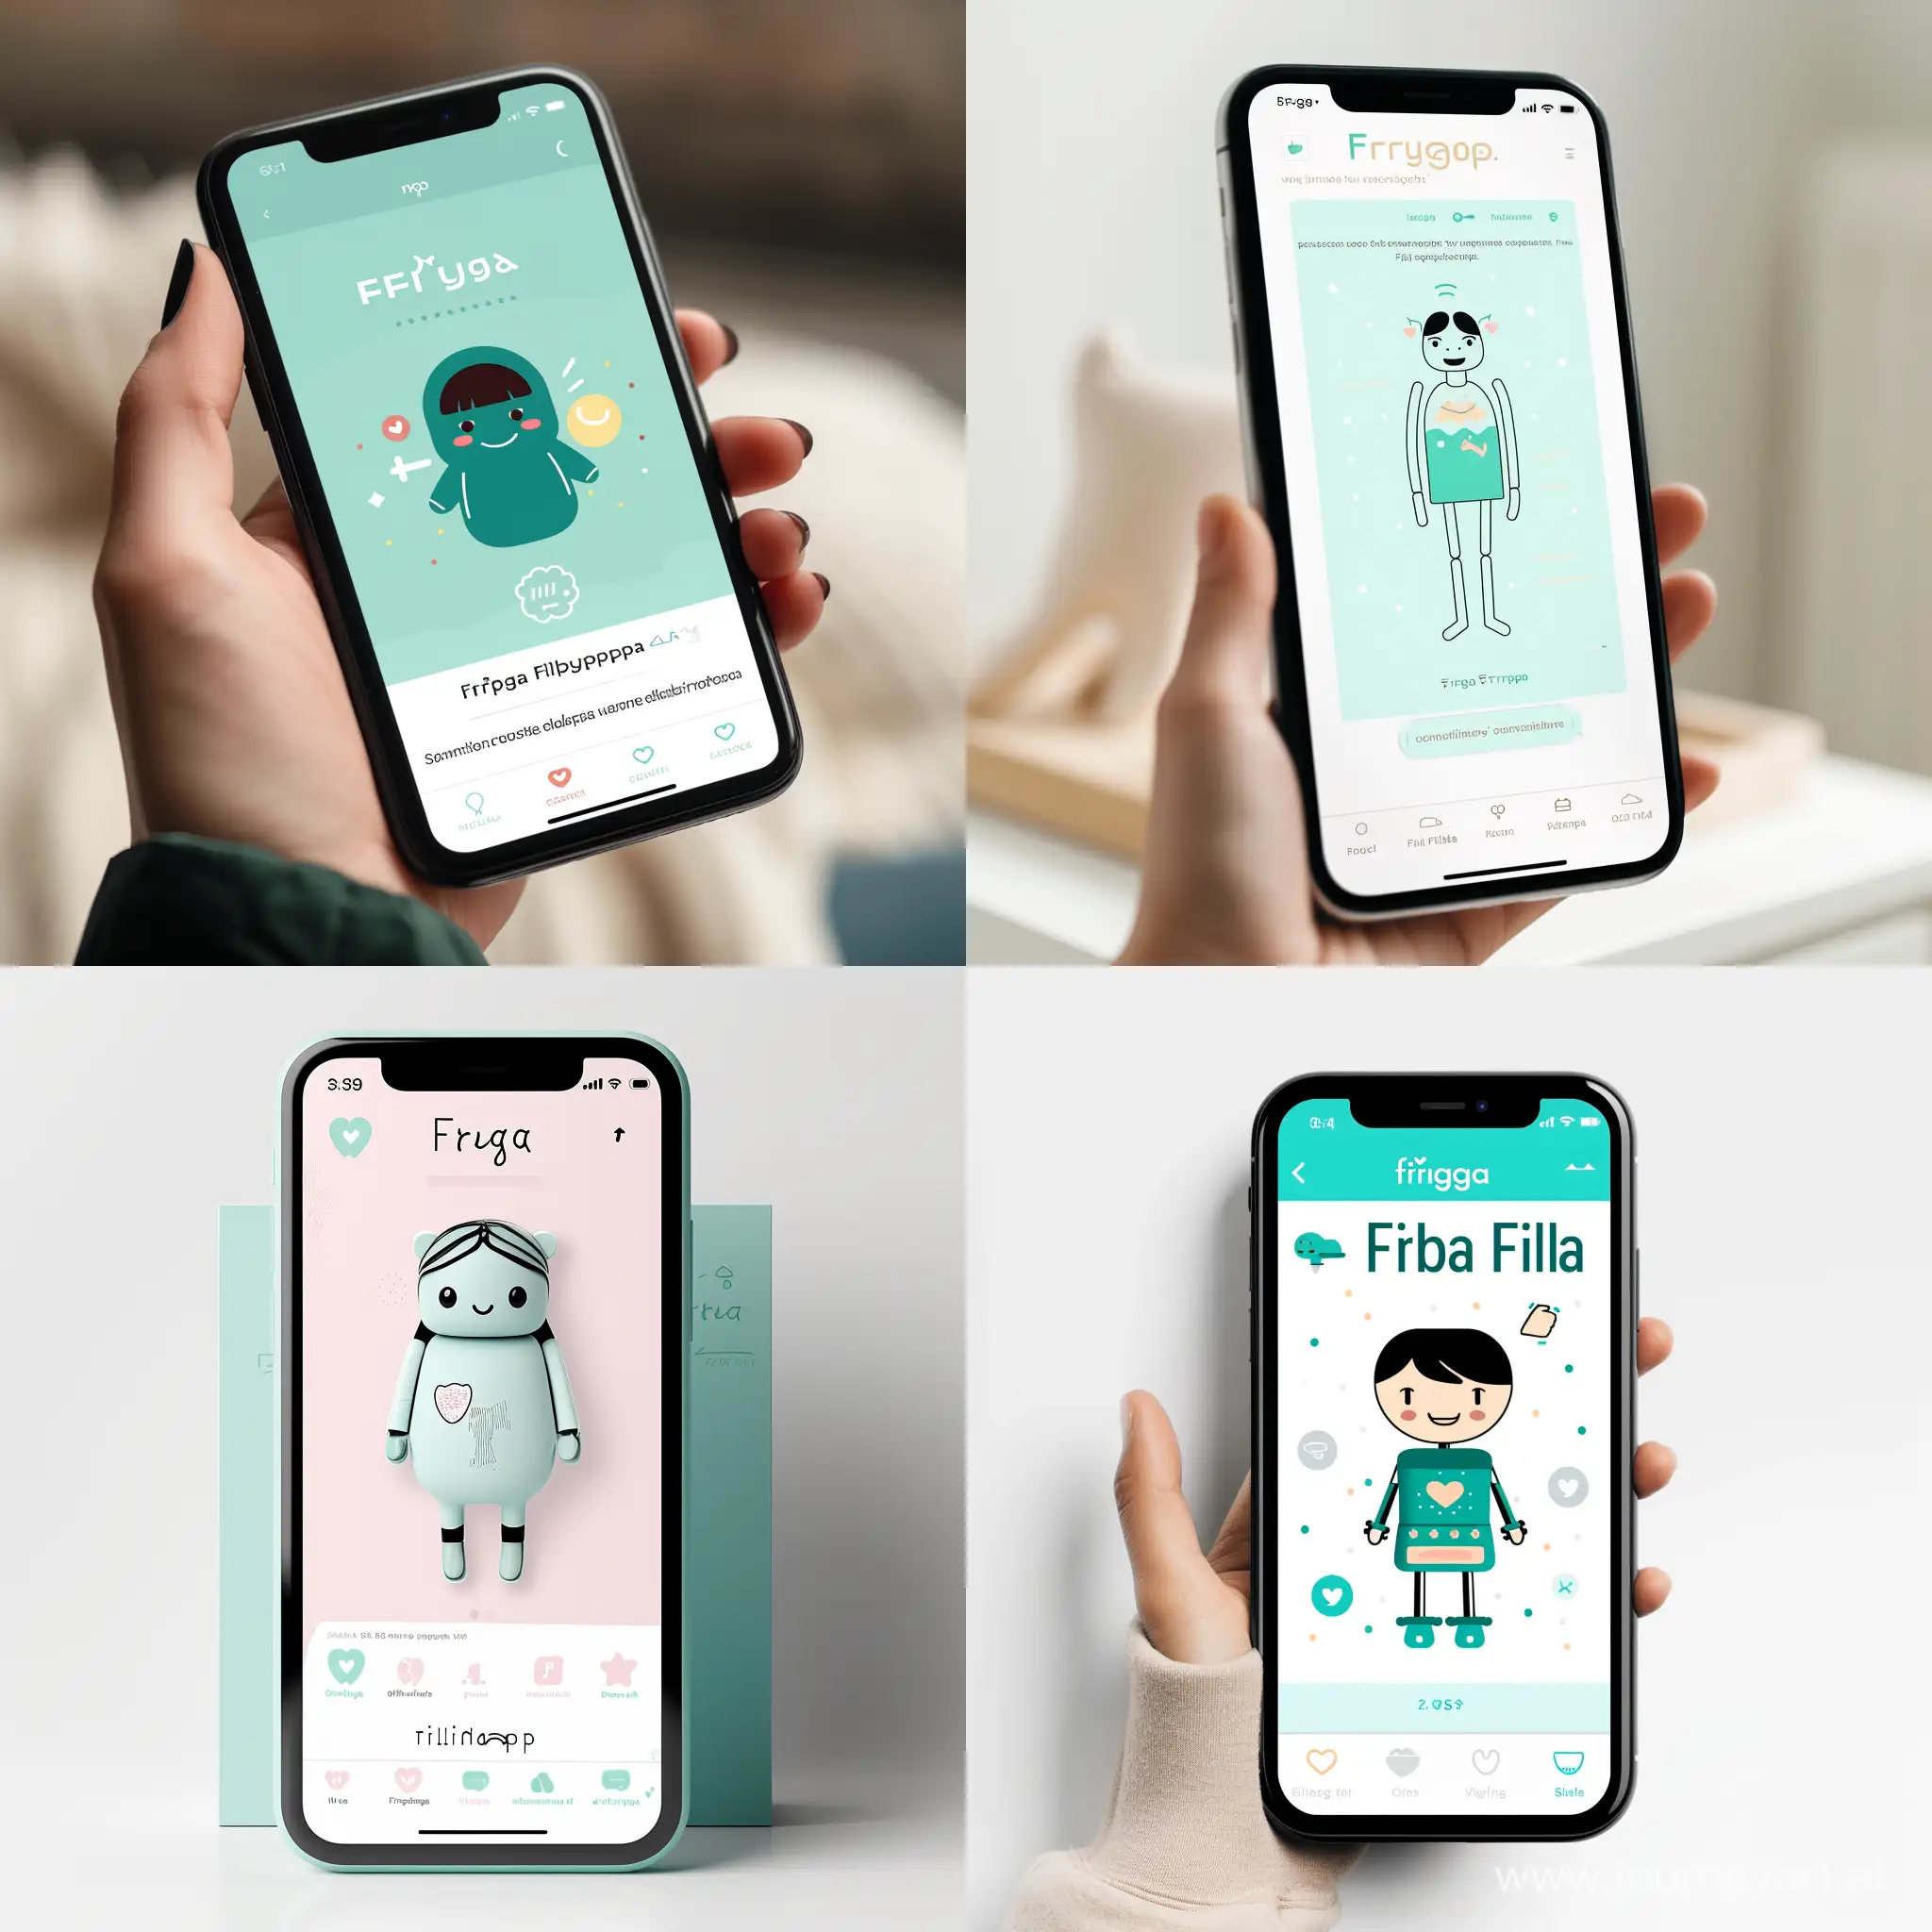 Create a mobile mockup of a reproductive educational social media chatbot app for teenagers that is called Fråga Filippa.